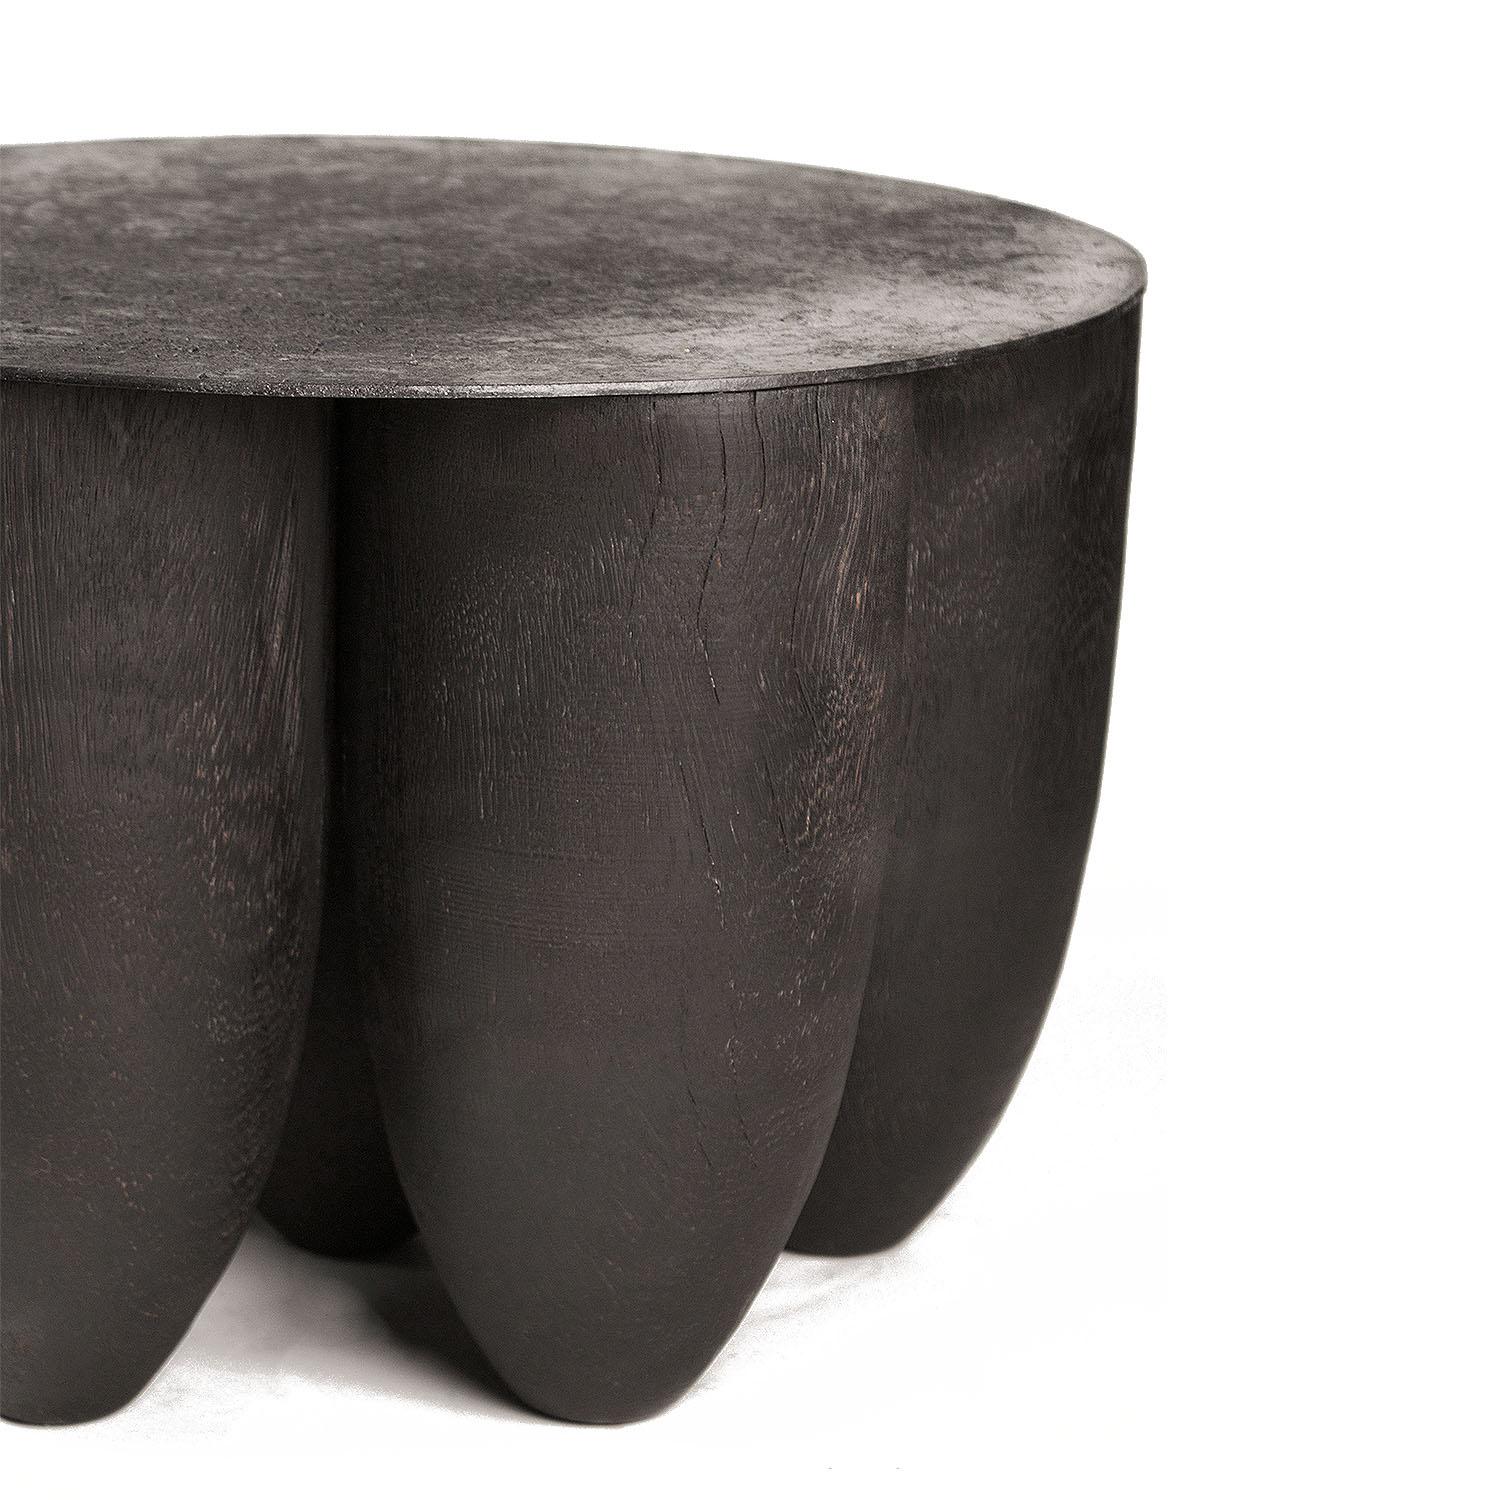 Modern Contemporary Black Coffee Table in Iroko Wood, Senufo by Arno Declercq For Sale